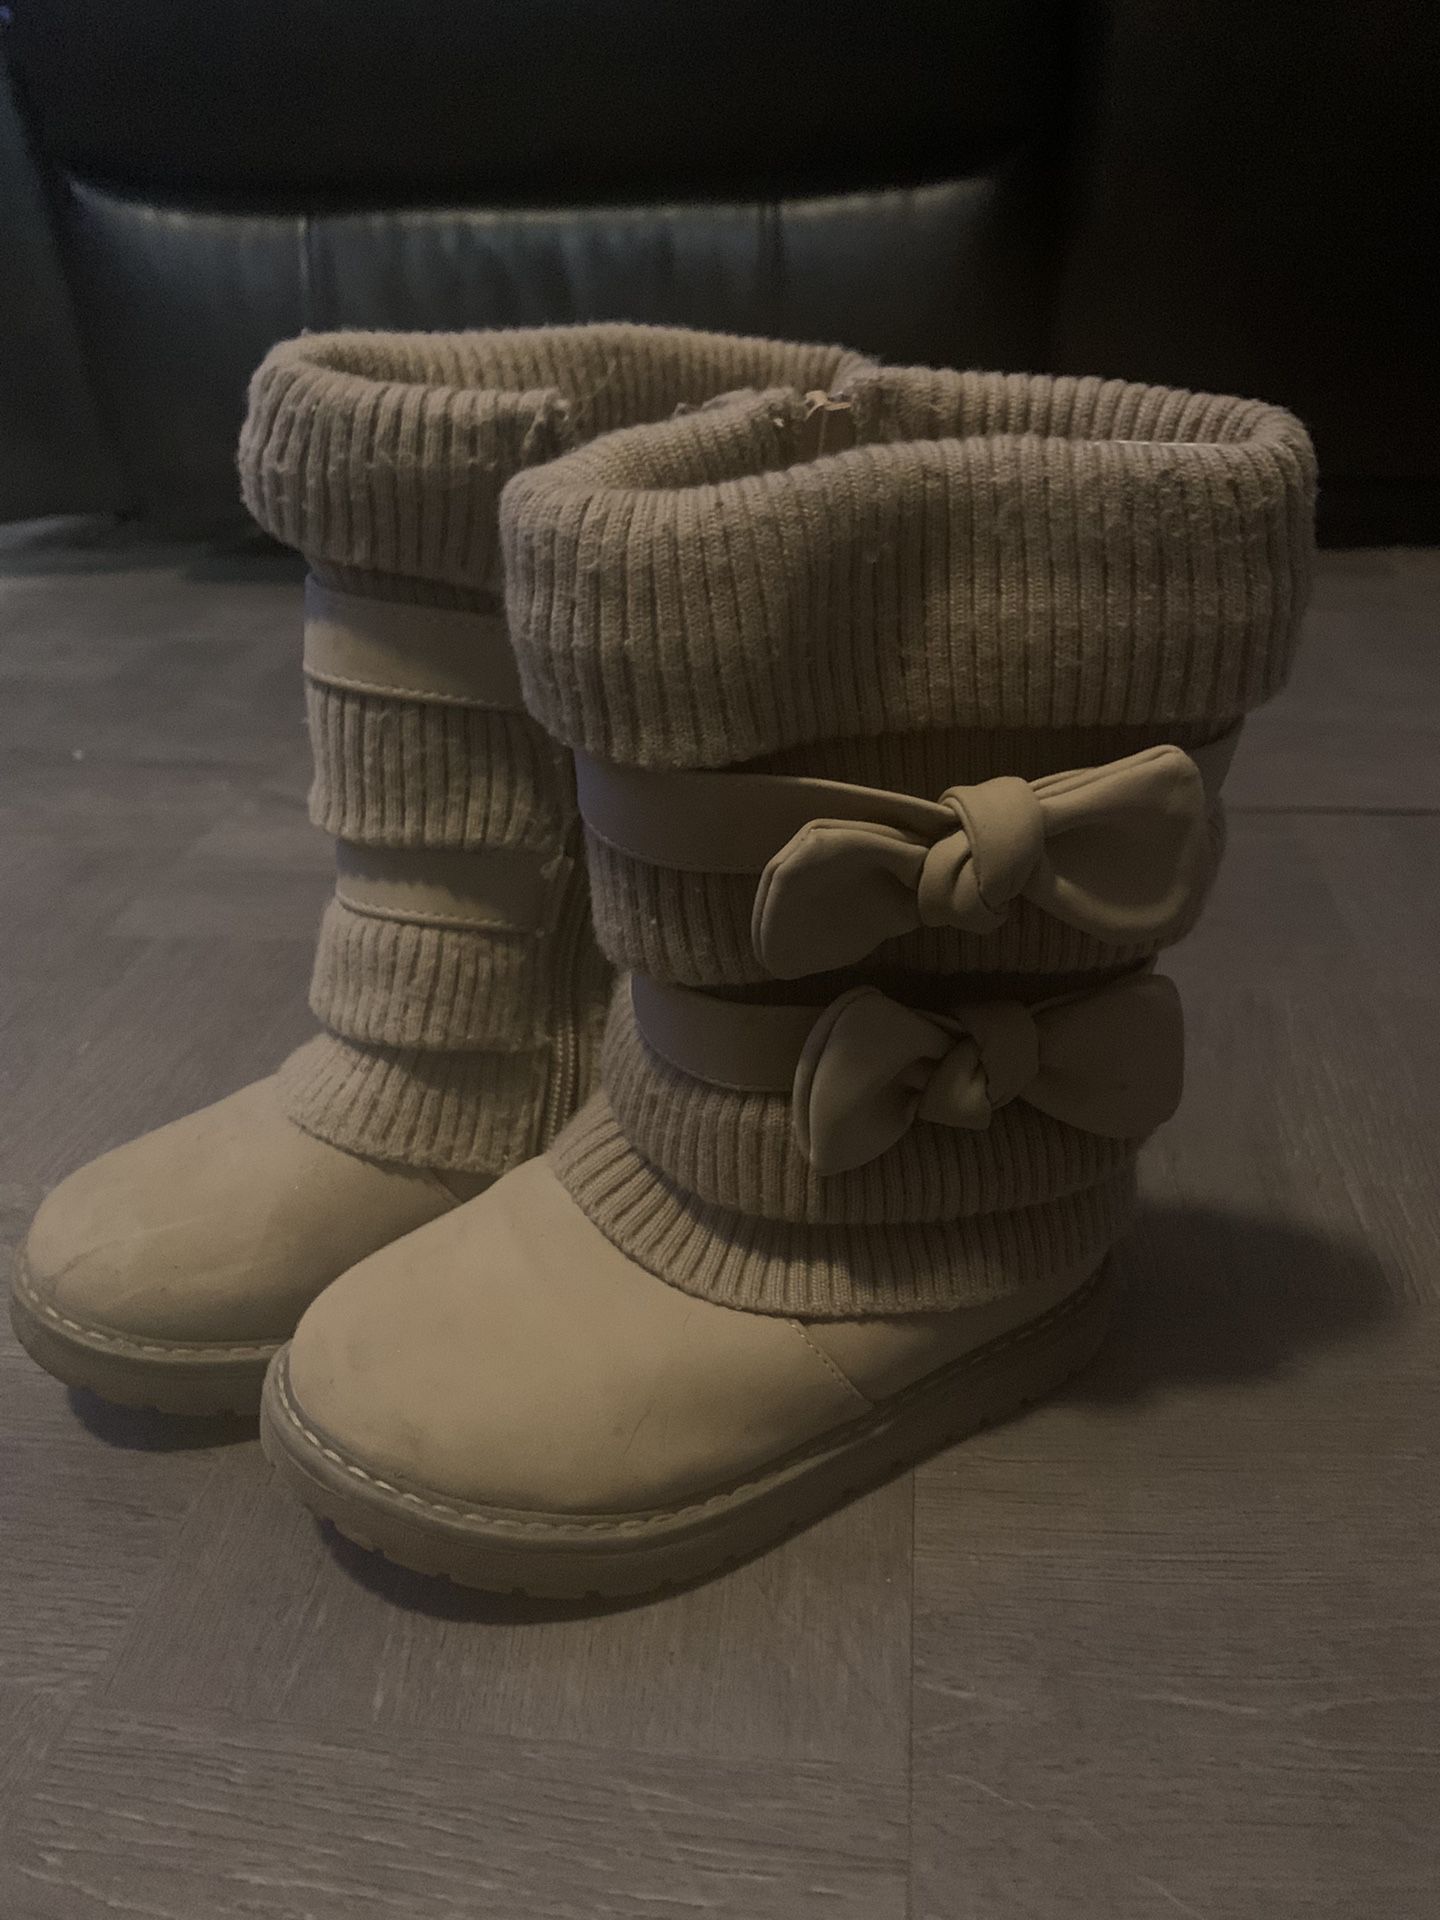 DREAM PAIRS Girl's Winter Snow Boots 